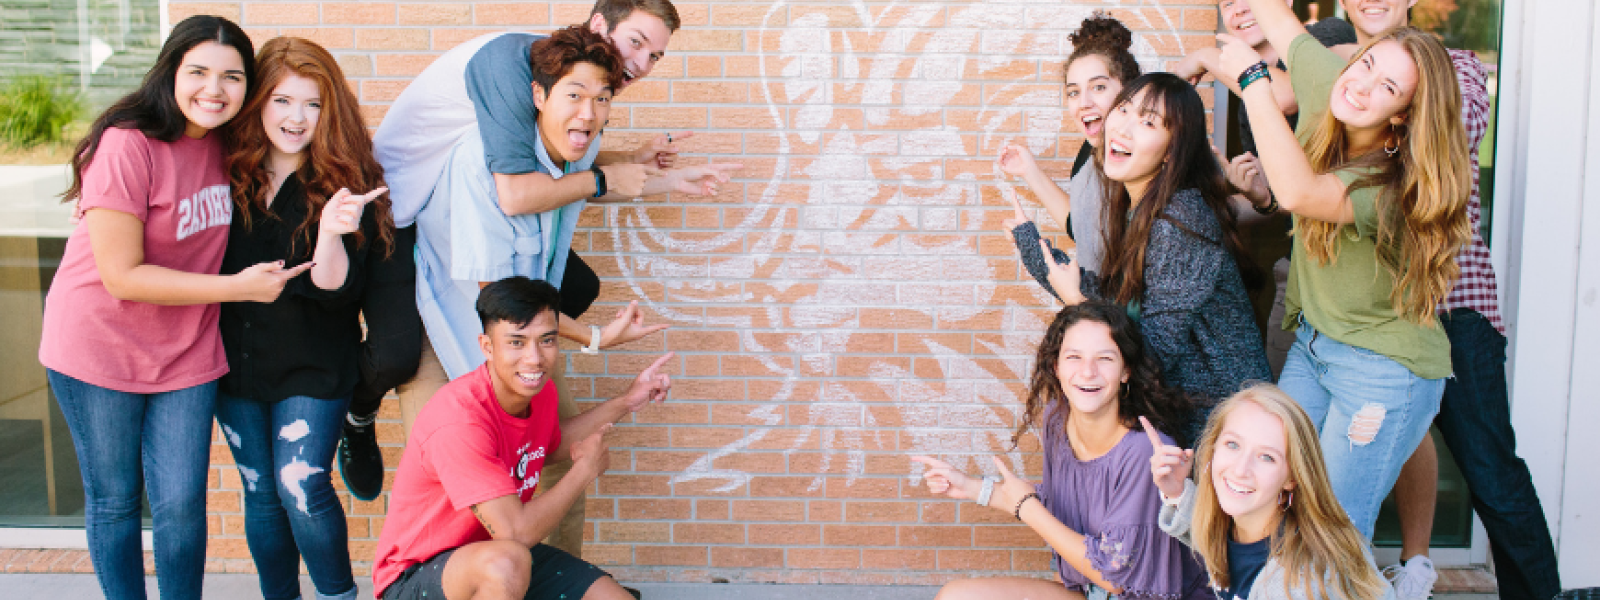 An image of students pointing to a wall painting of the Rams logo